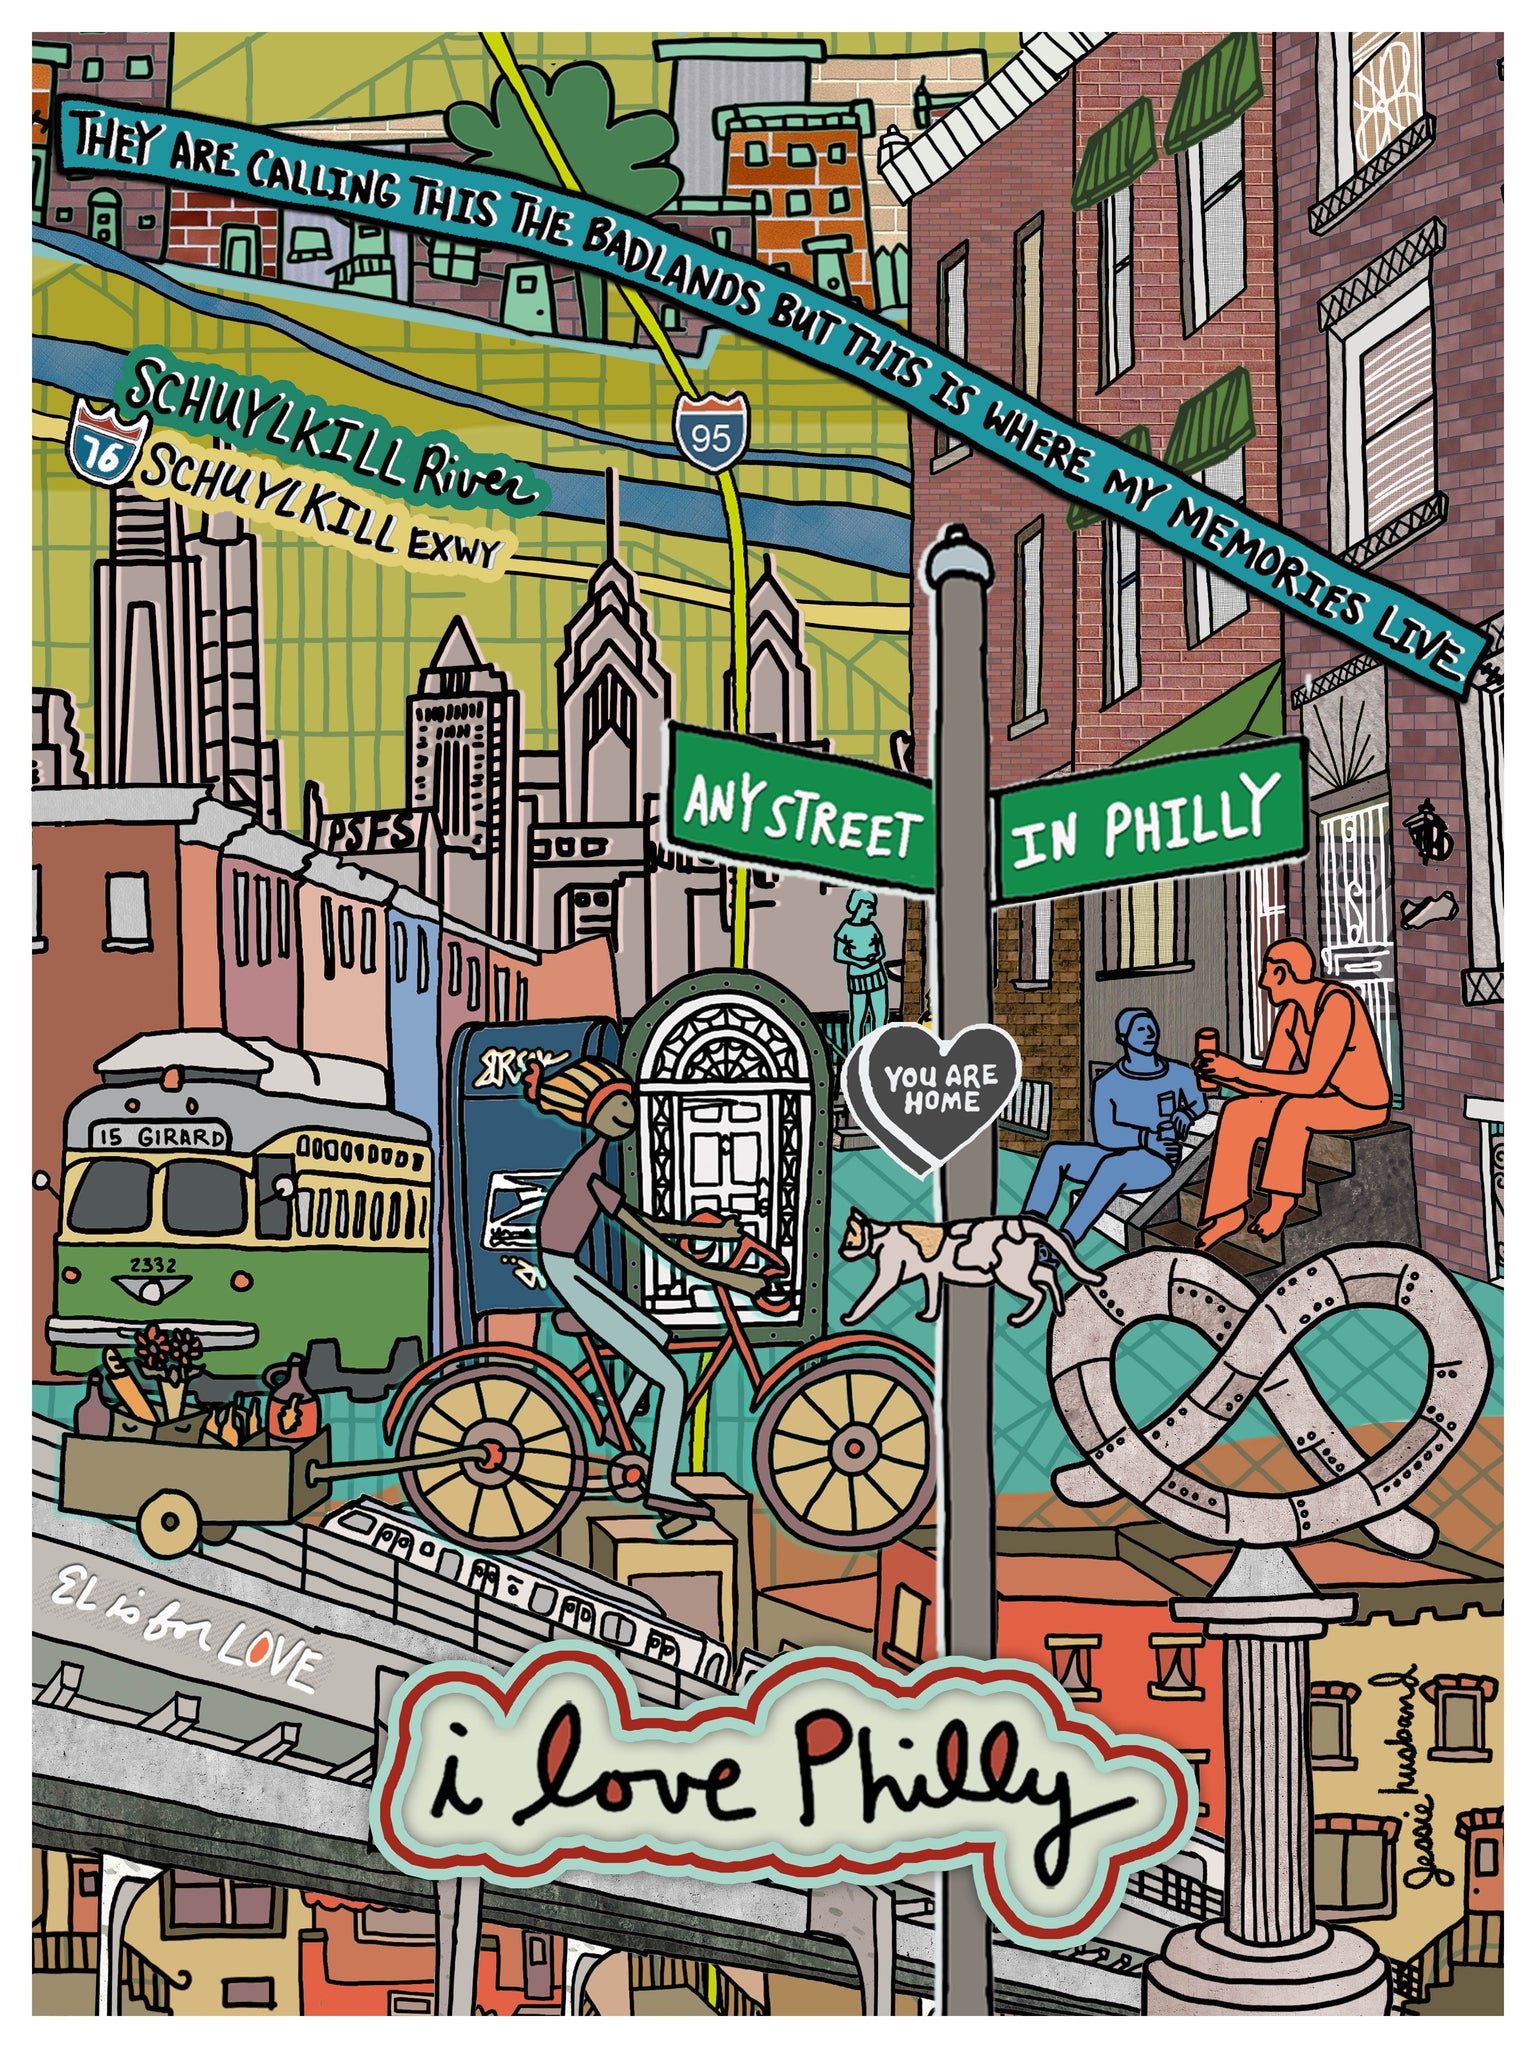 I Love Philly, Customize w/ your cross streets (framing options available) - Jessie husband